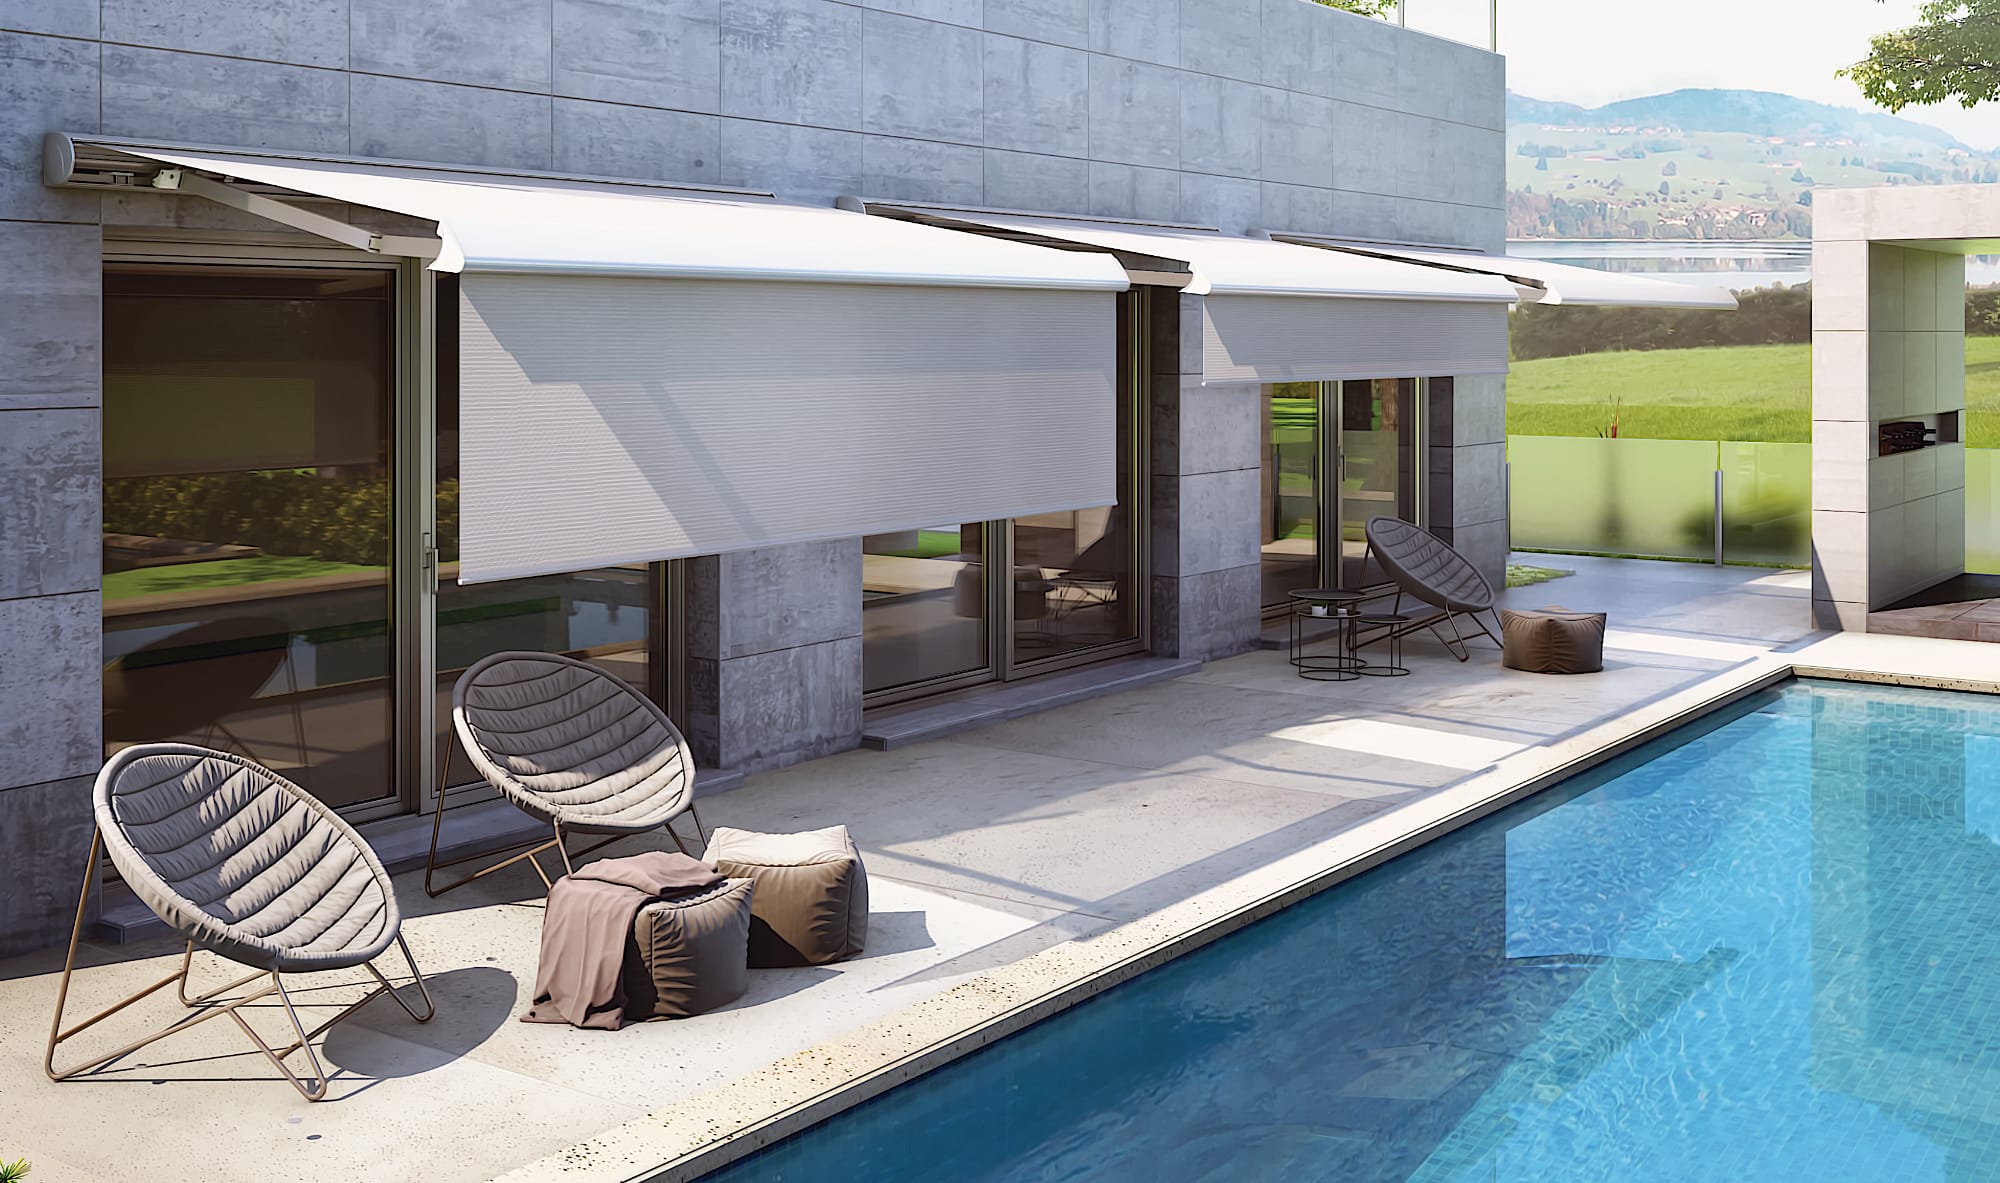 Retractable awnings installed by pool.